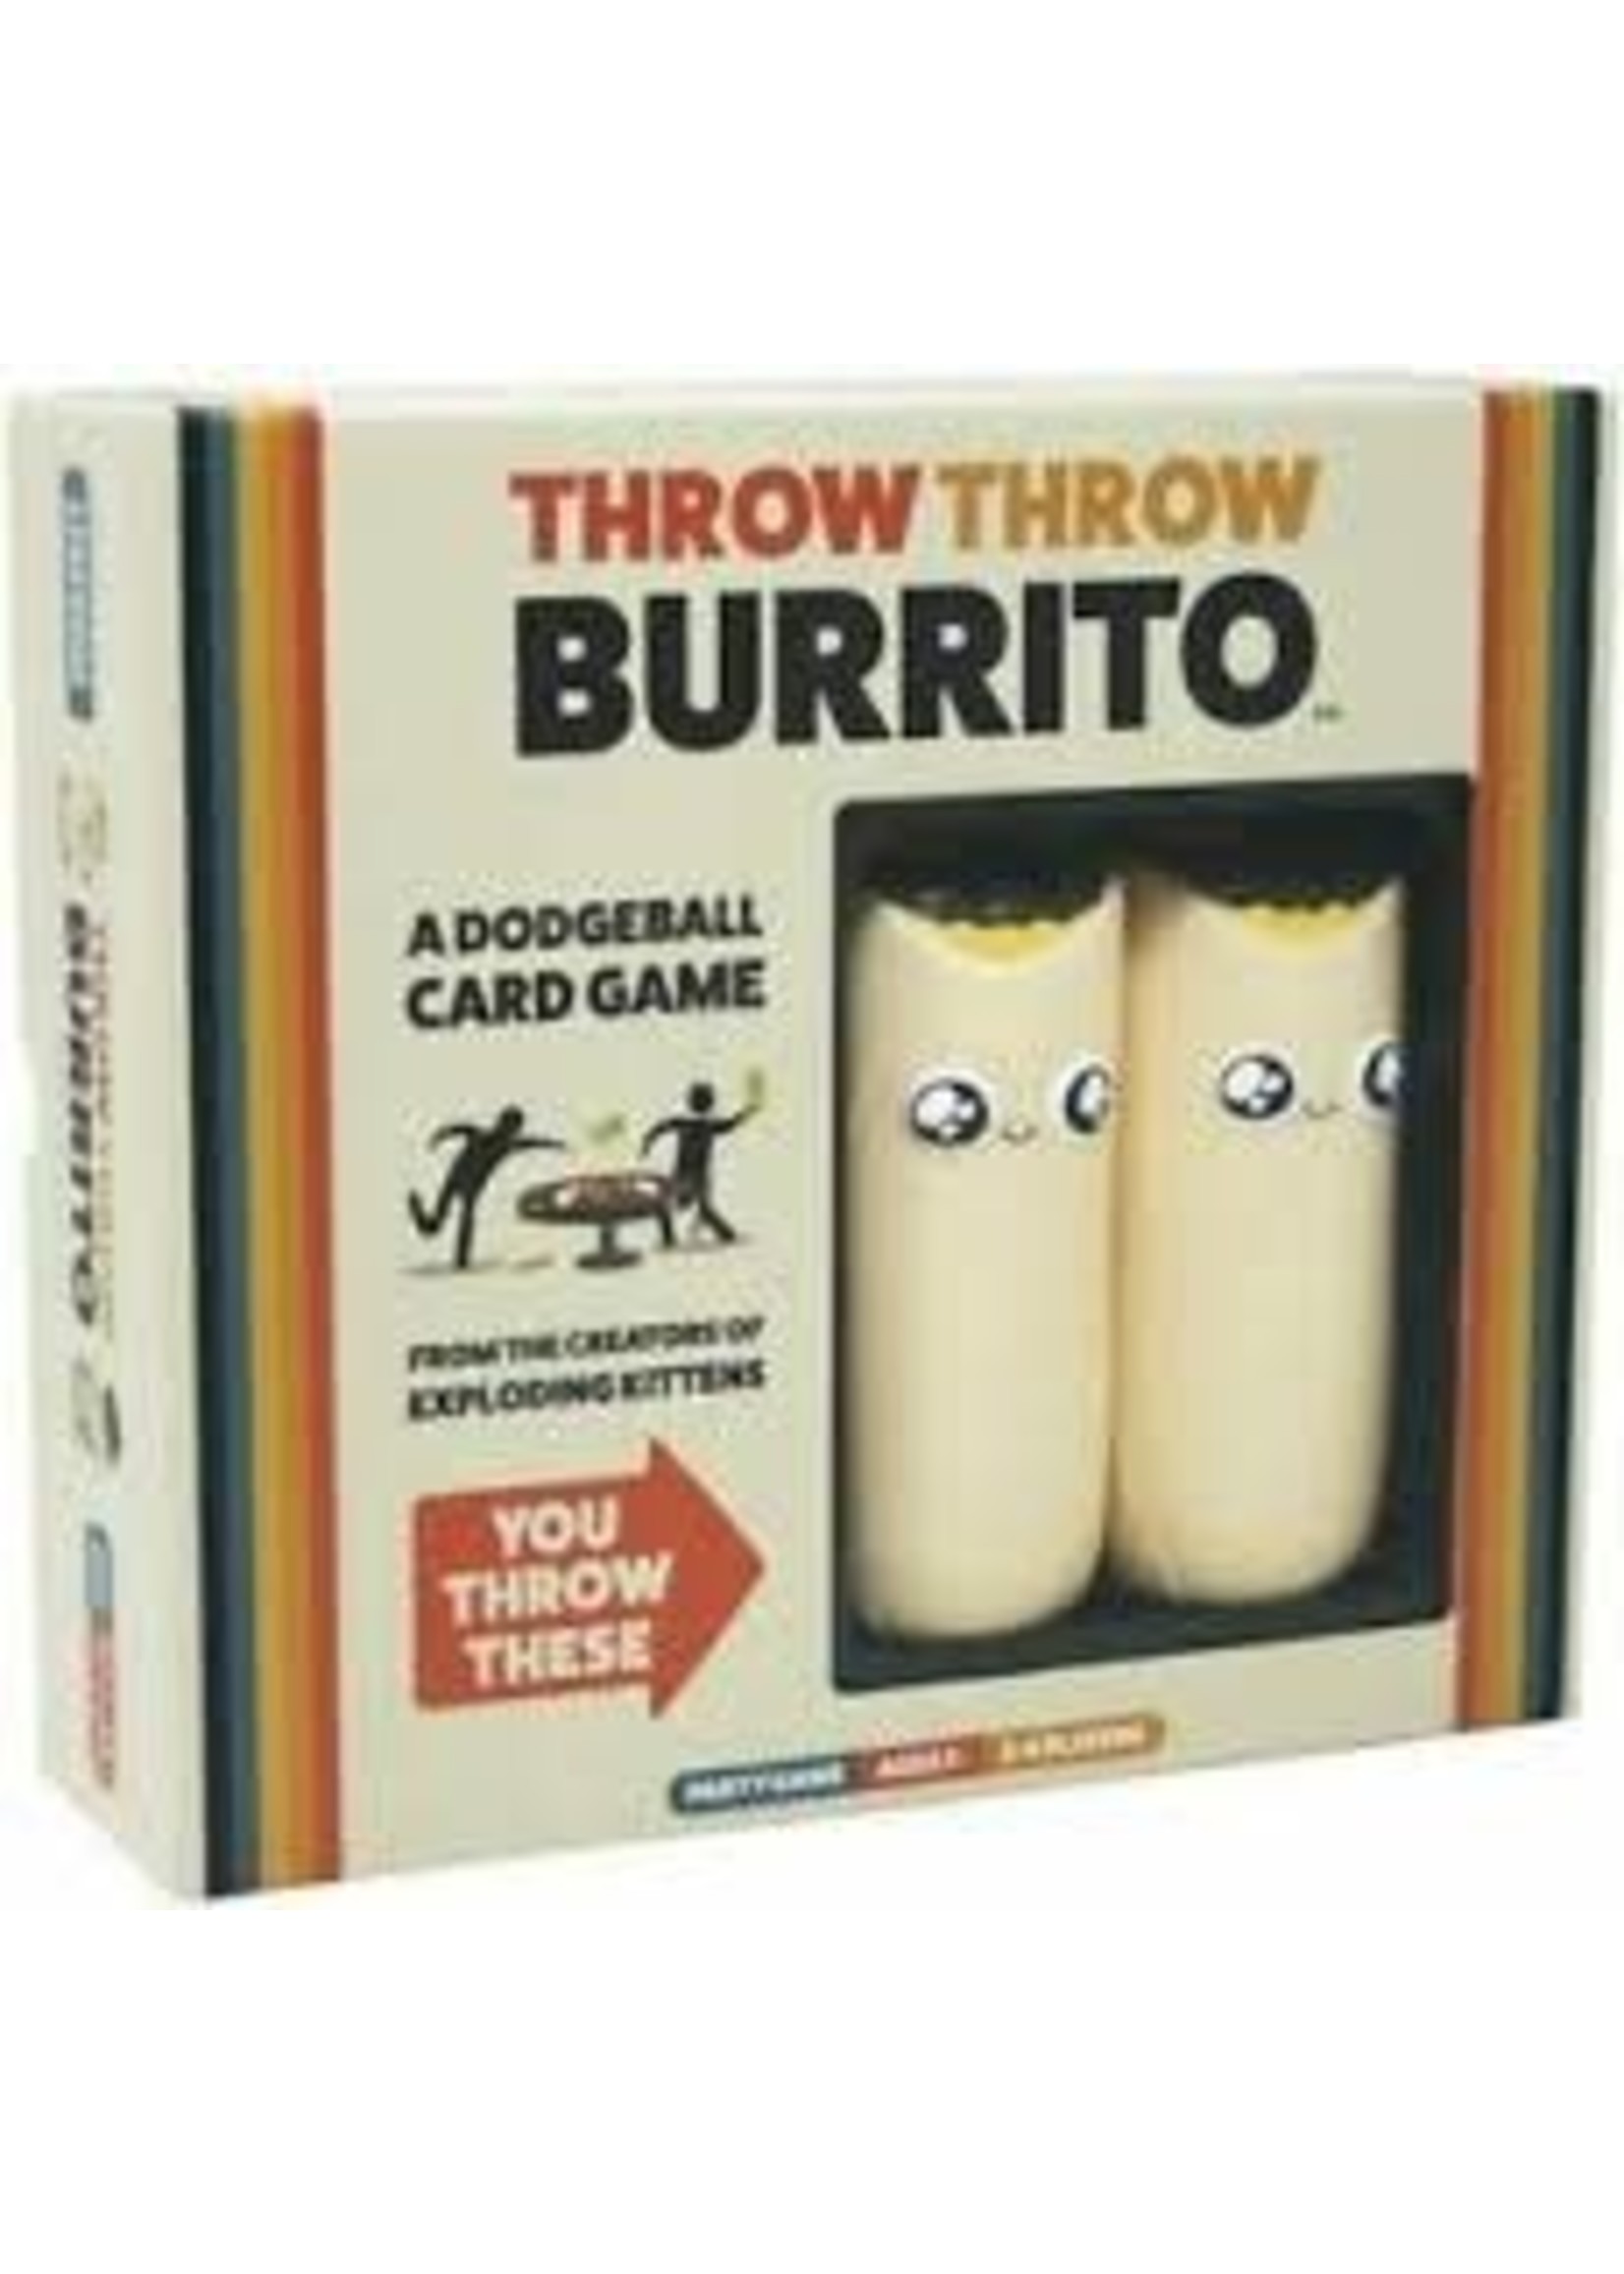 Exploding Kittens Throw Throw Burrito: A Dodgeball Card Game